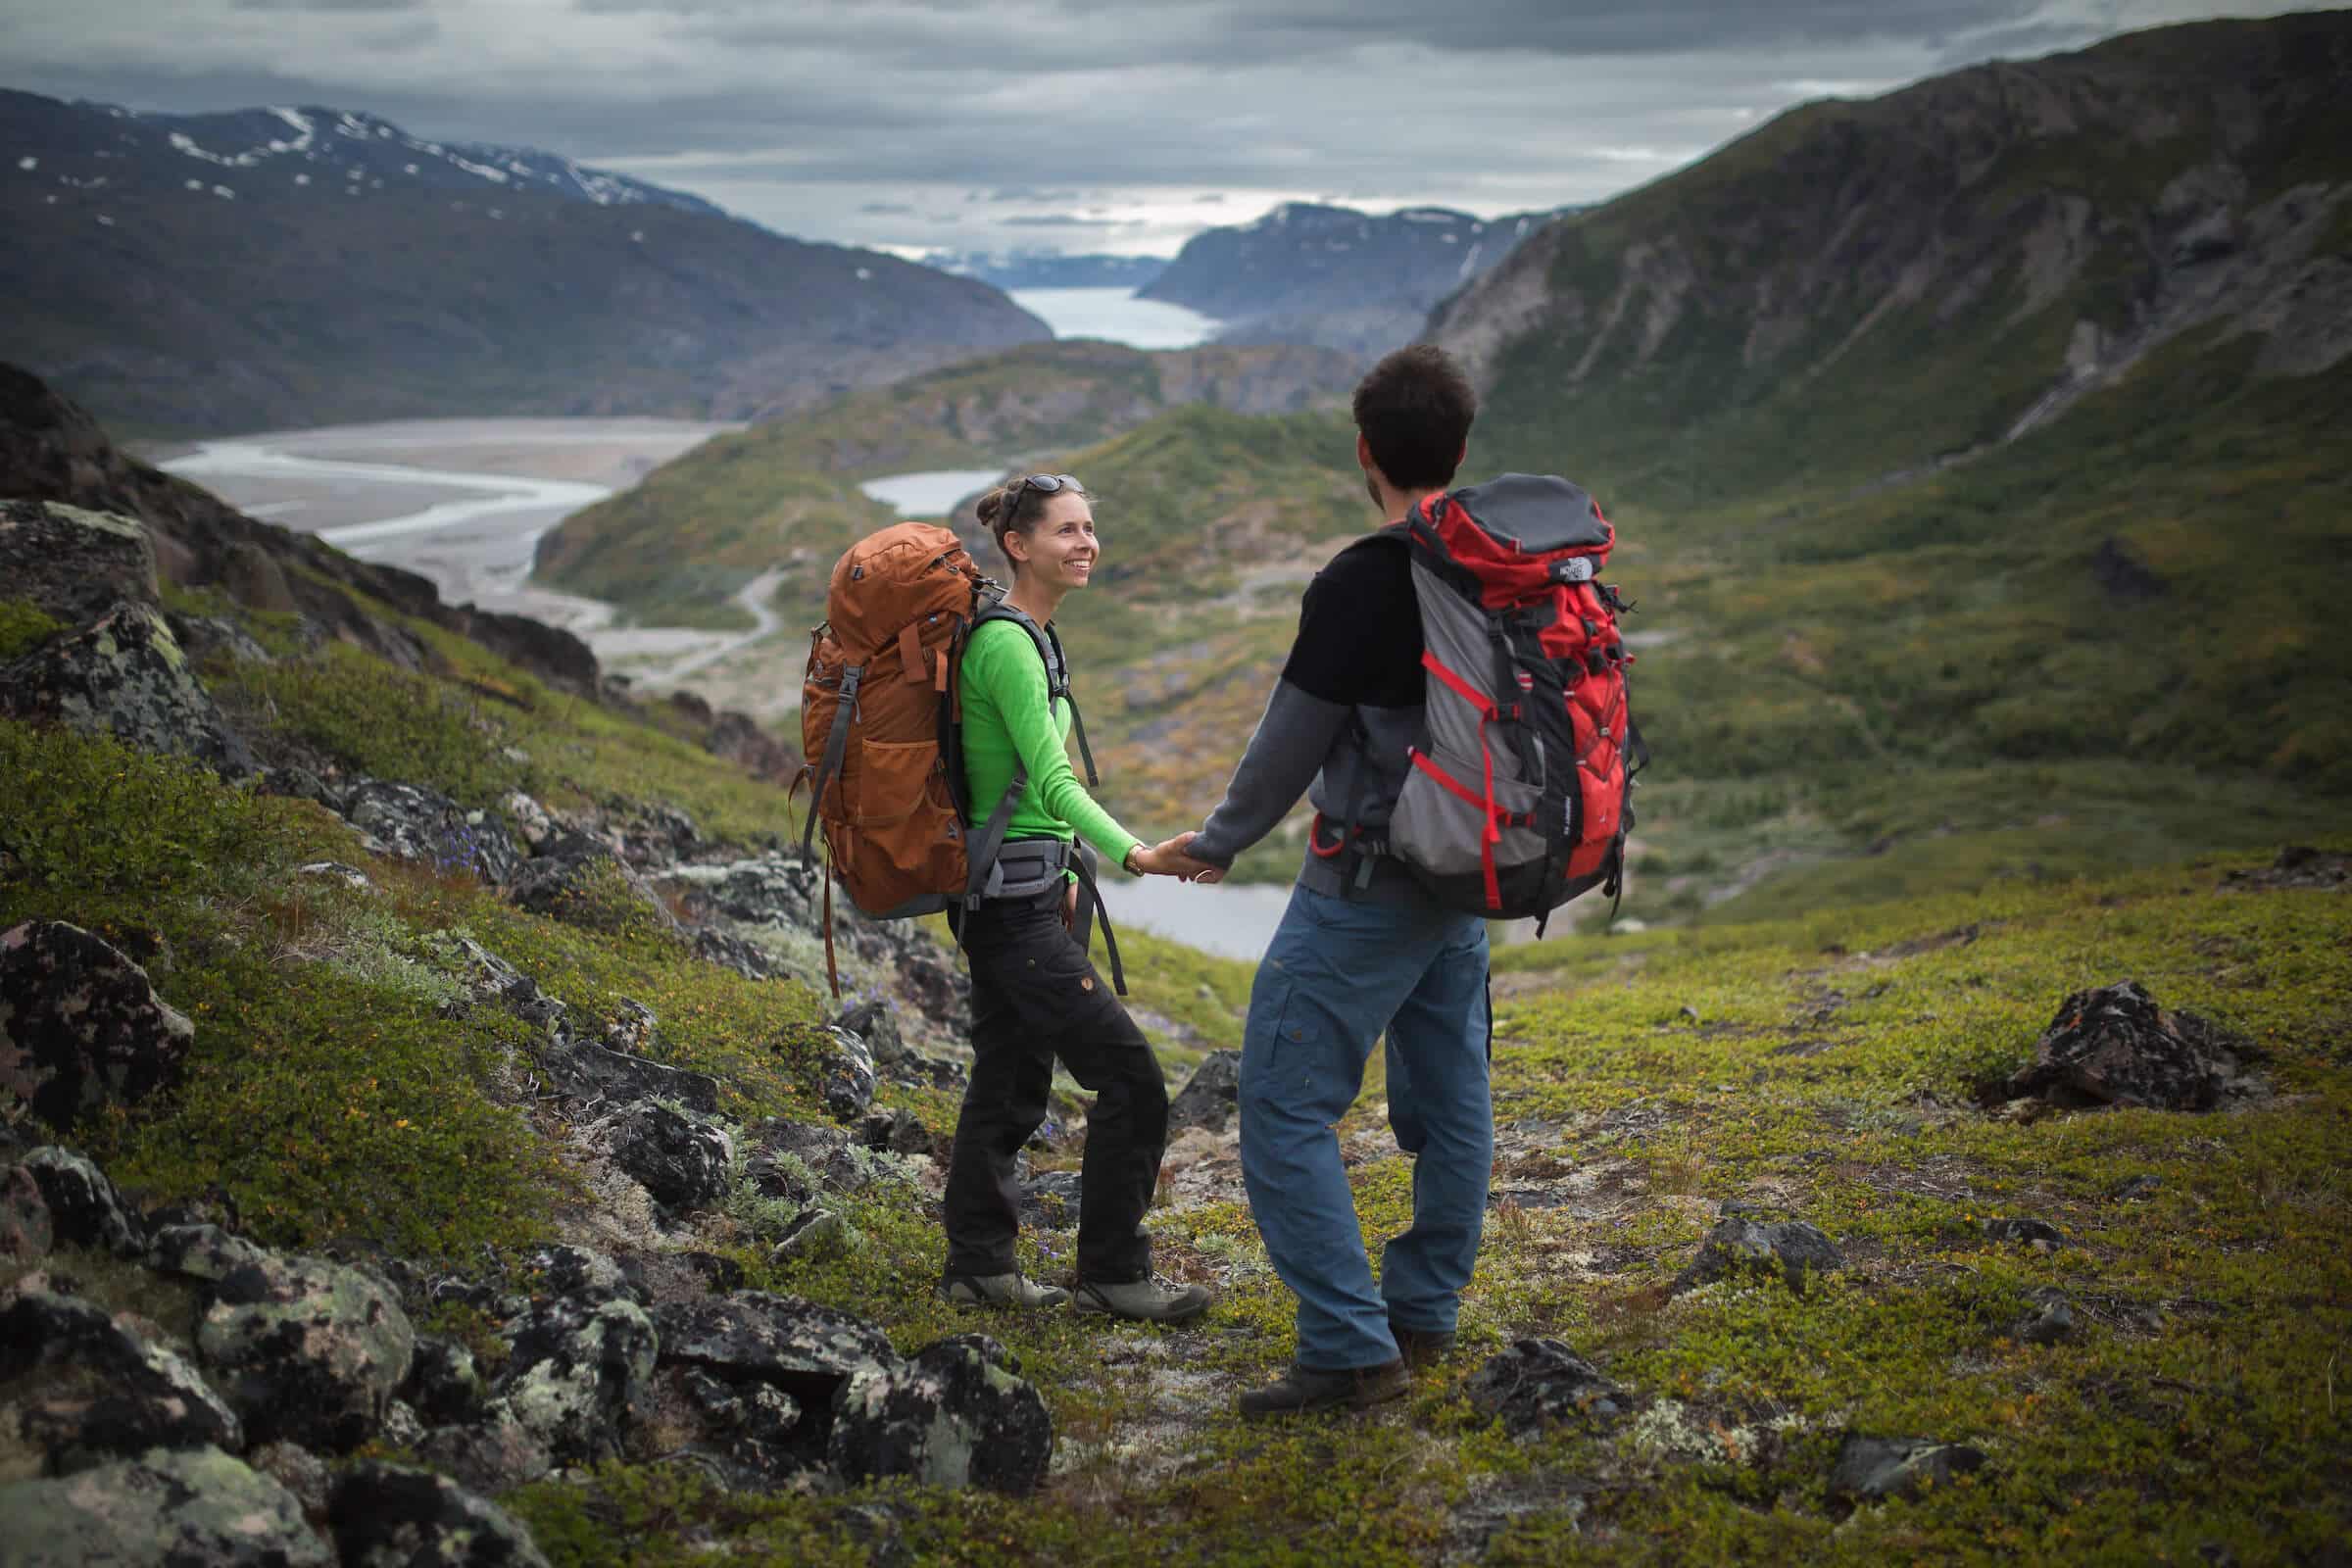 Hikers looking towards the ice cap in Narsarsuaq. Photo by David Buchmann.